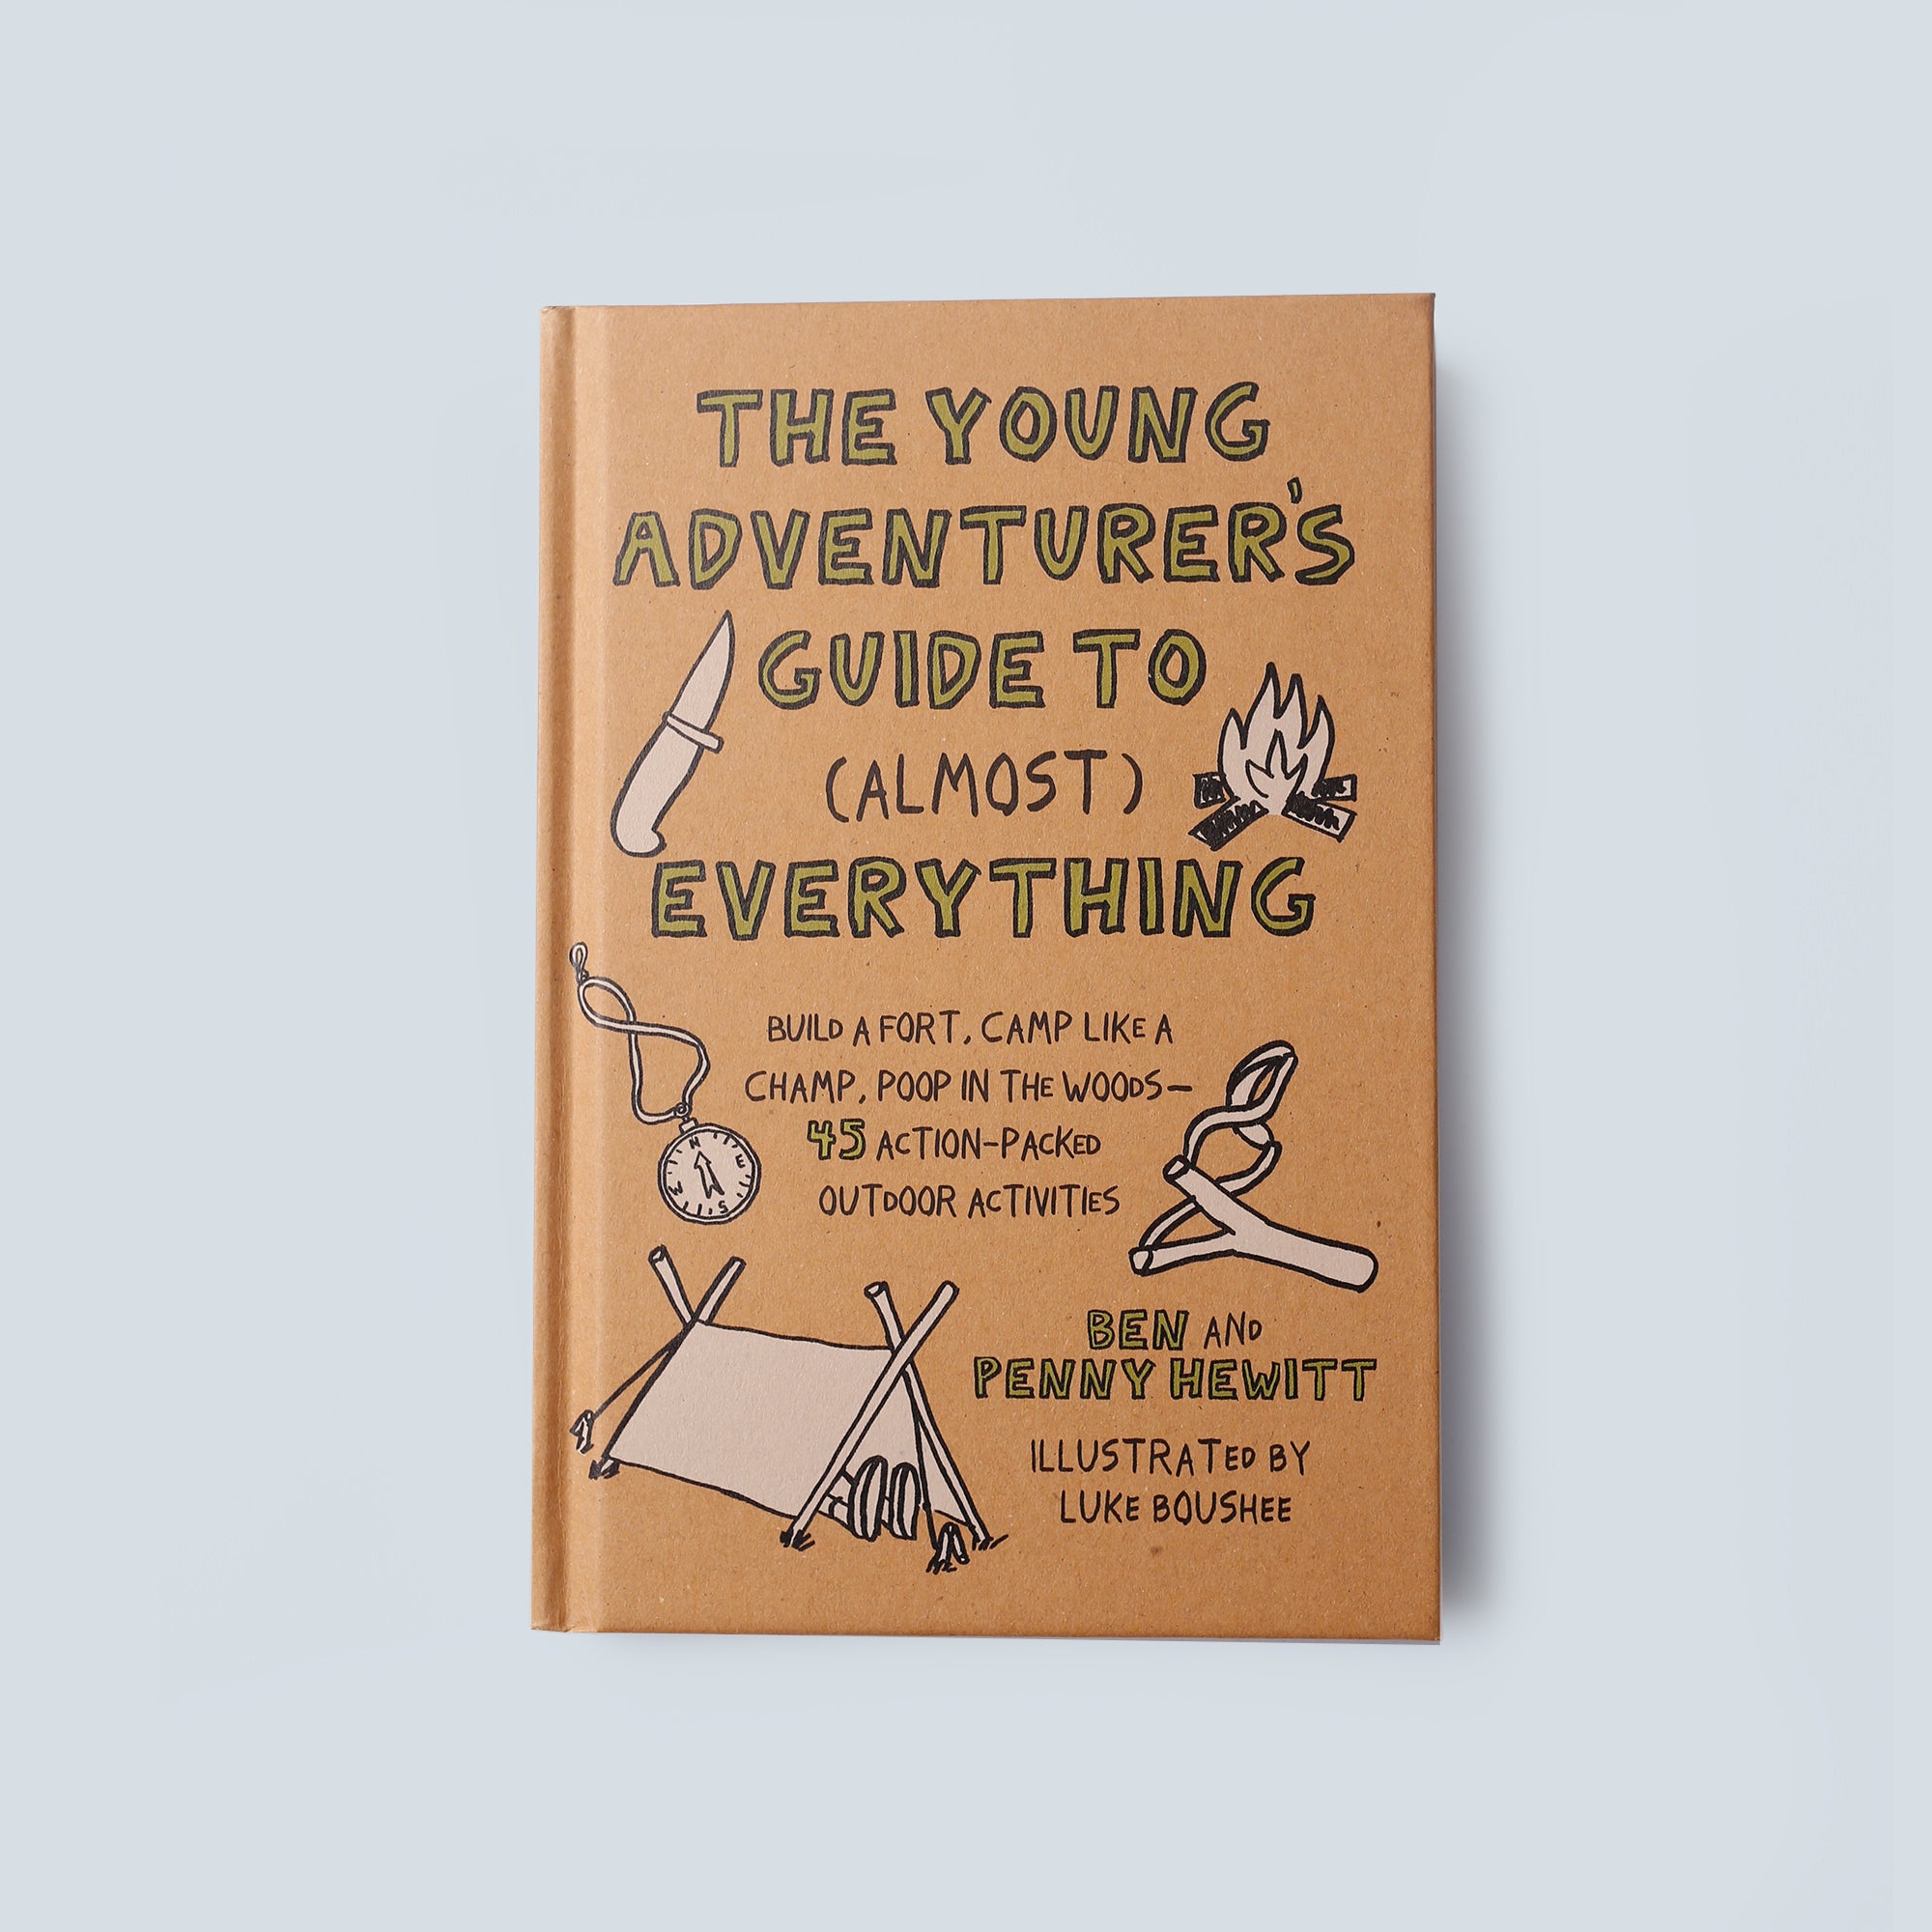 The Young Adventurer's Guide To (Almost) Everything